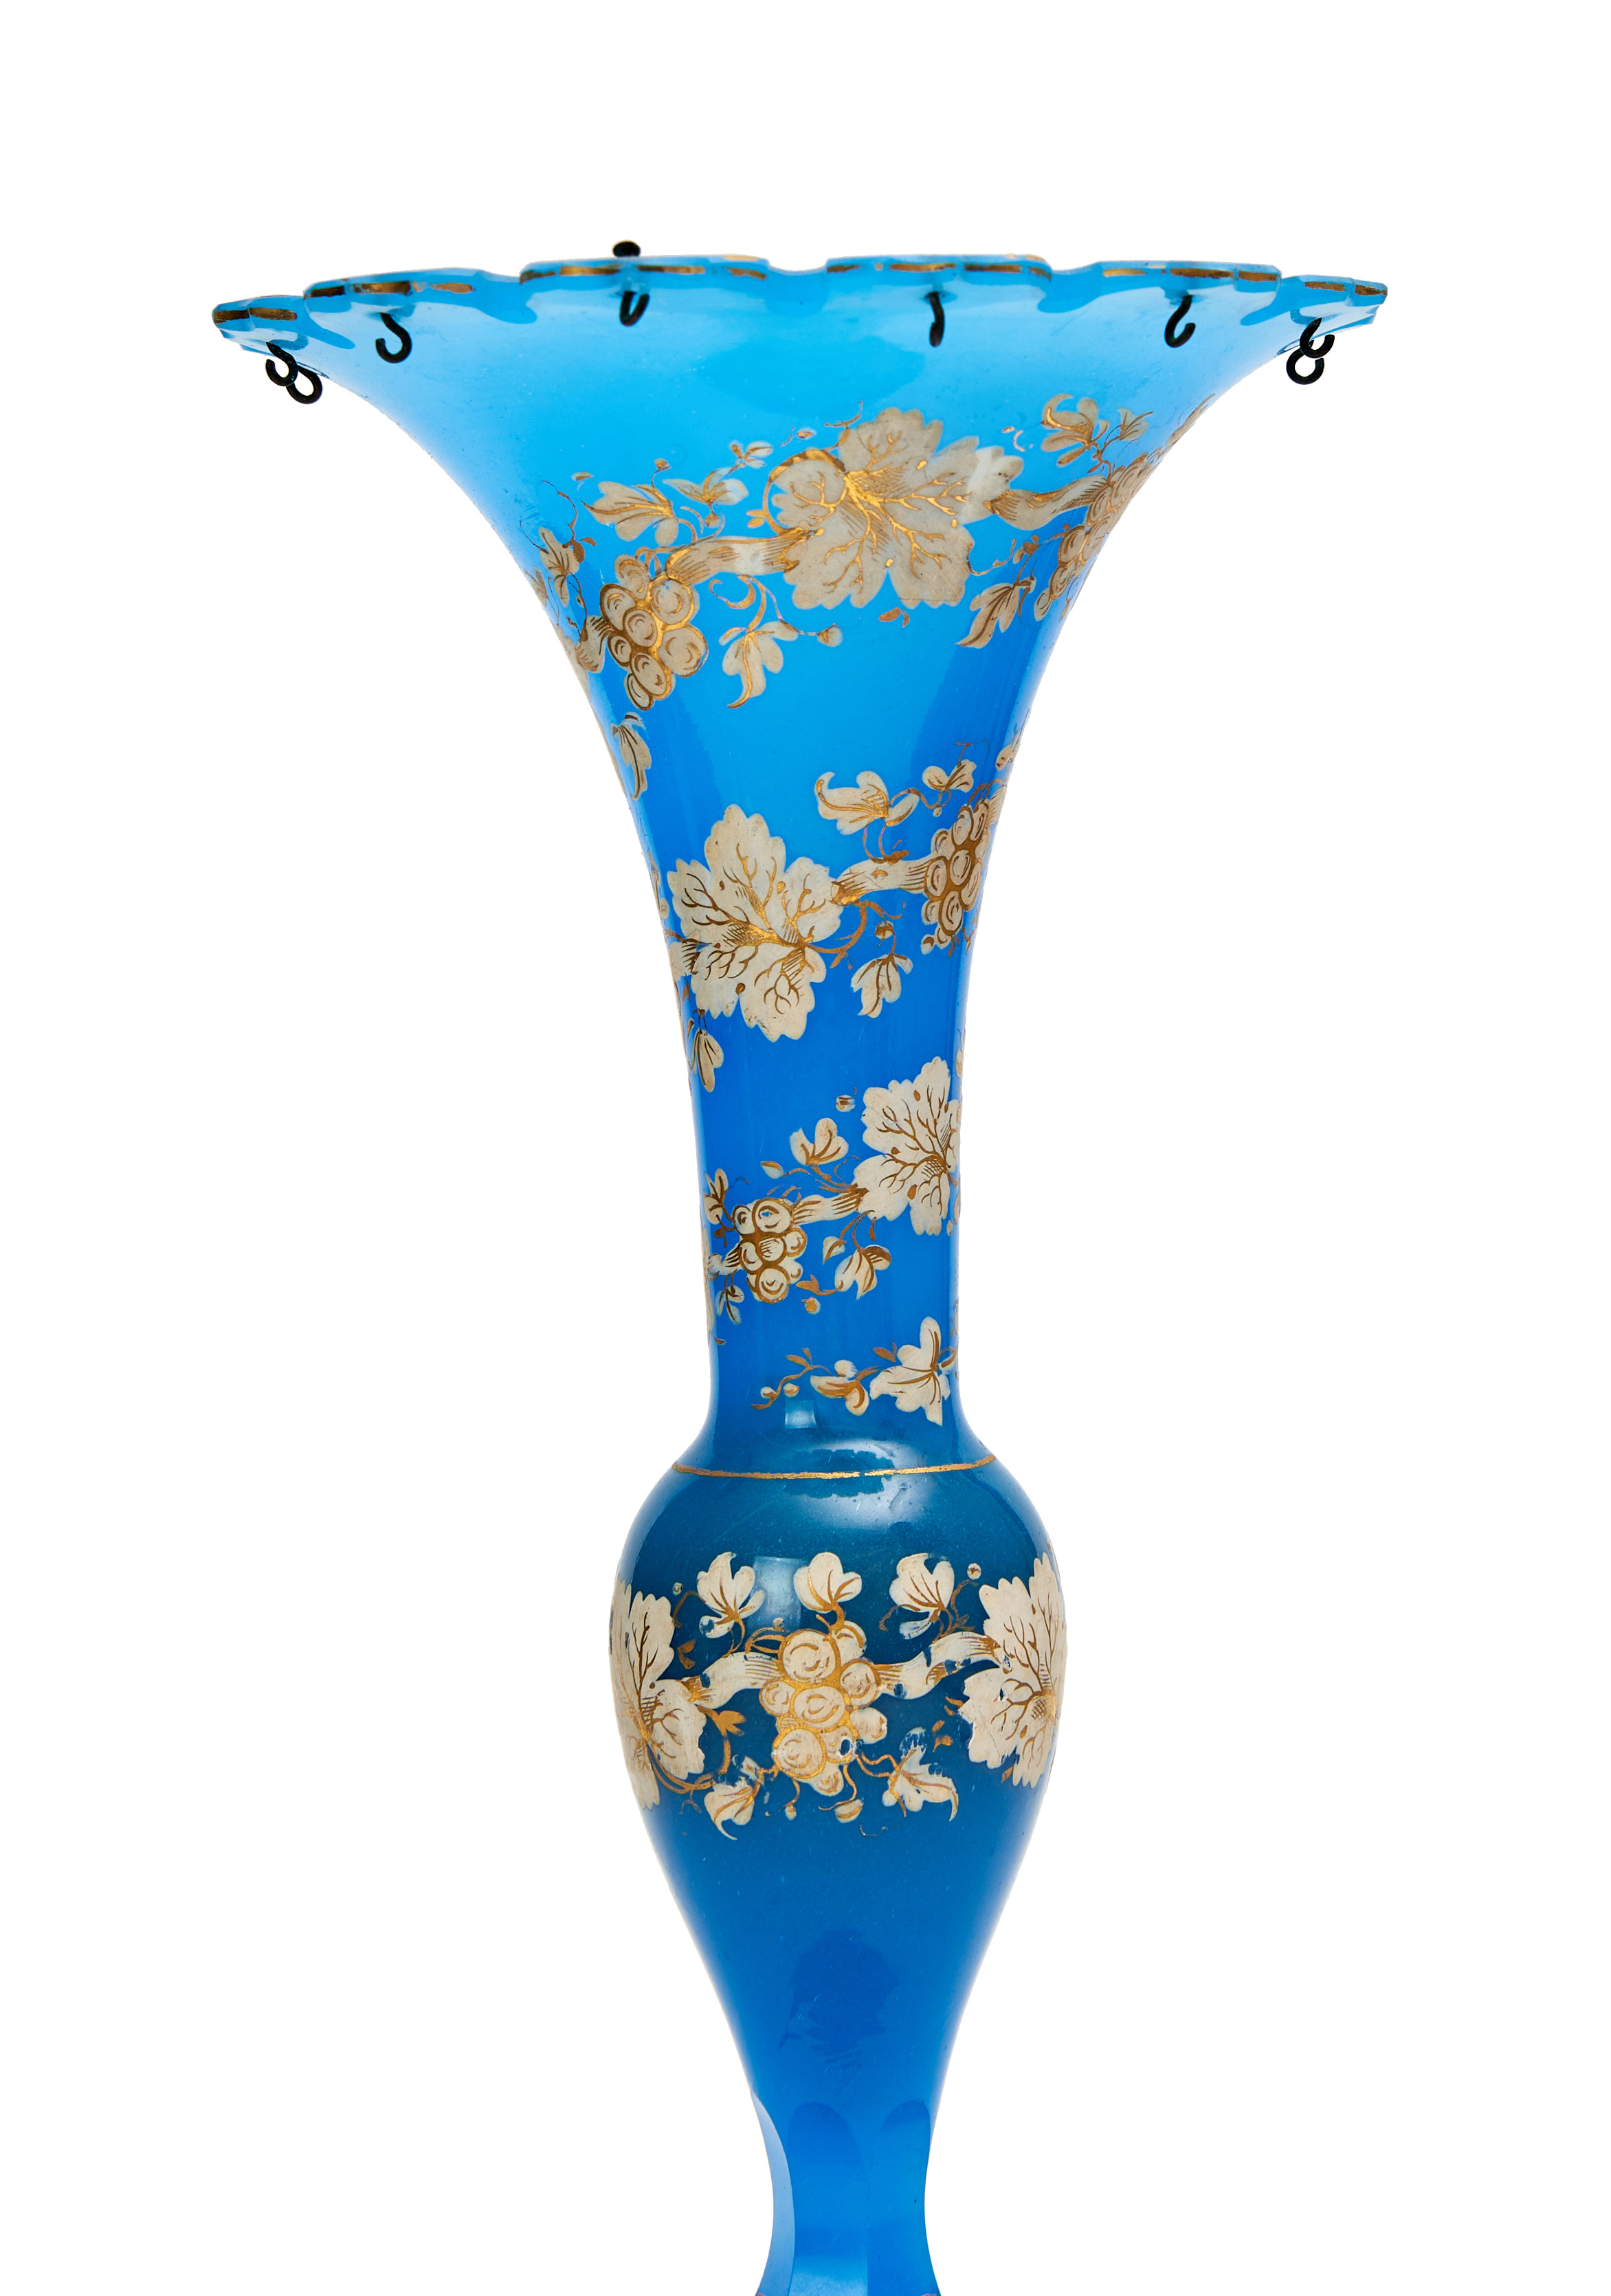 A BOHEMIAN GLASS VASE, 19TH CENTURY - Image 2 of 2